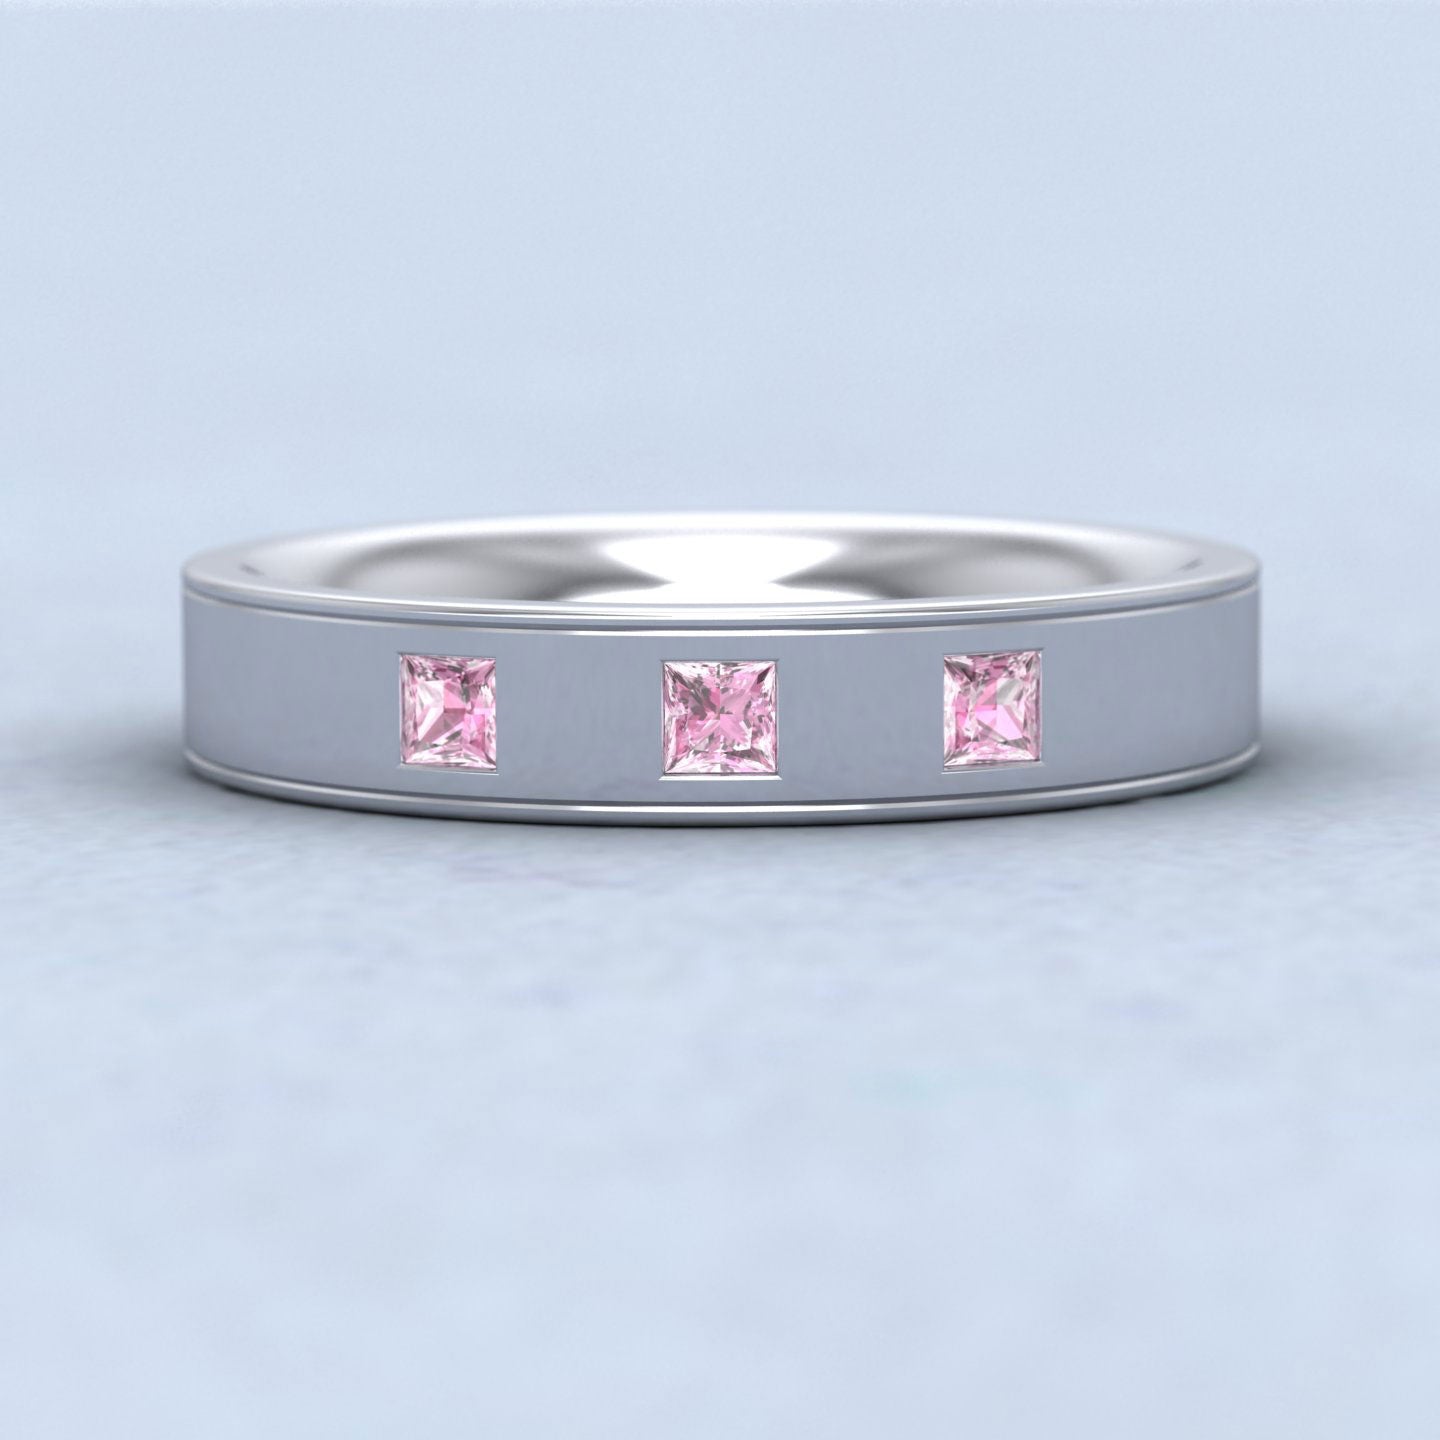 Princess Cut Pink Sapphire And Line Patterned 950 Platinum 4mm Wedding Ring